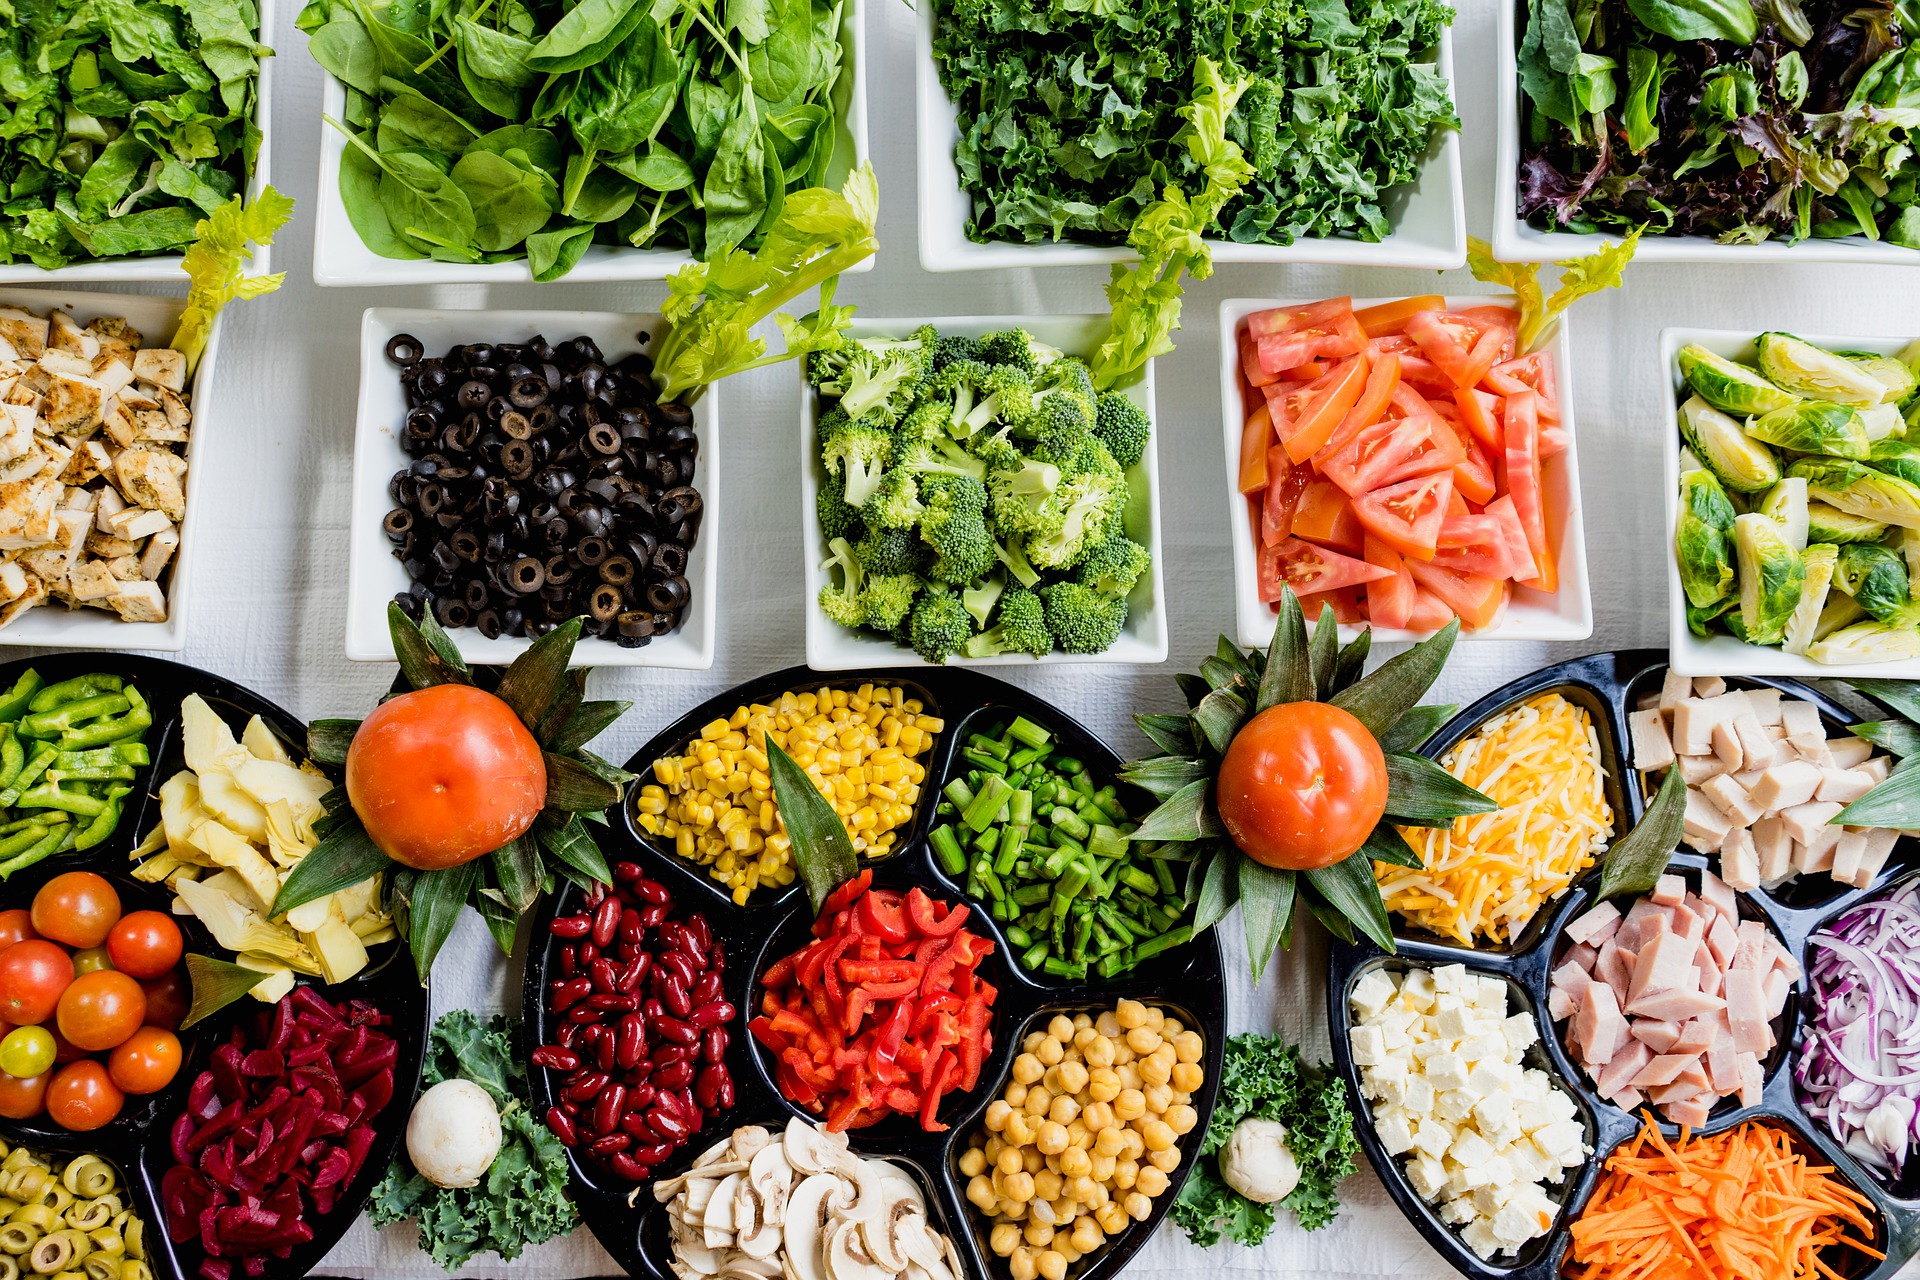 A salad bar can be as simple or elaborate as you would like. (Photo courtesy of Pixabay)